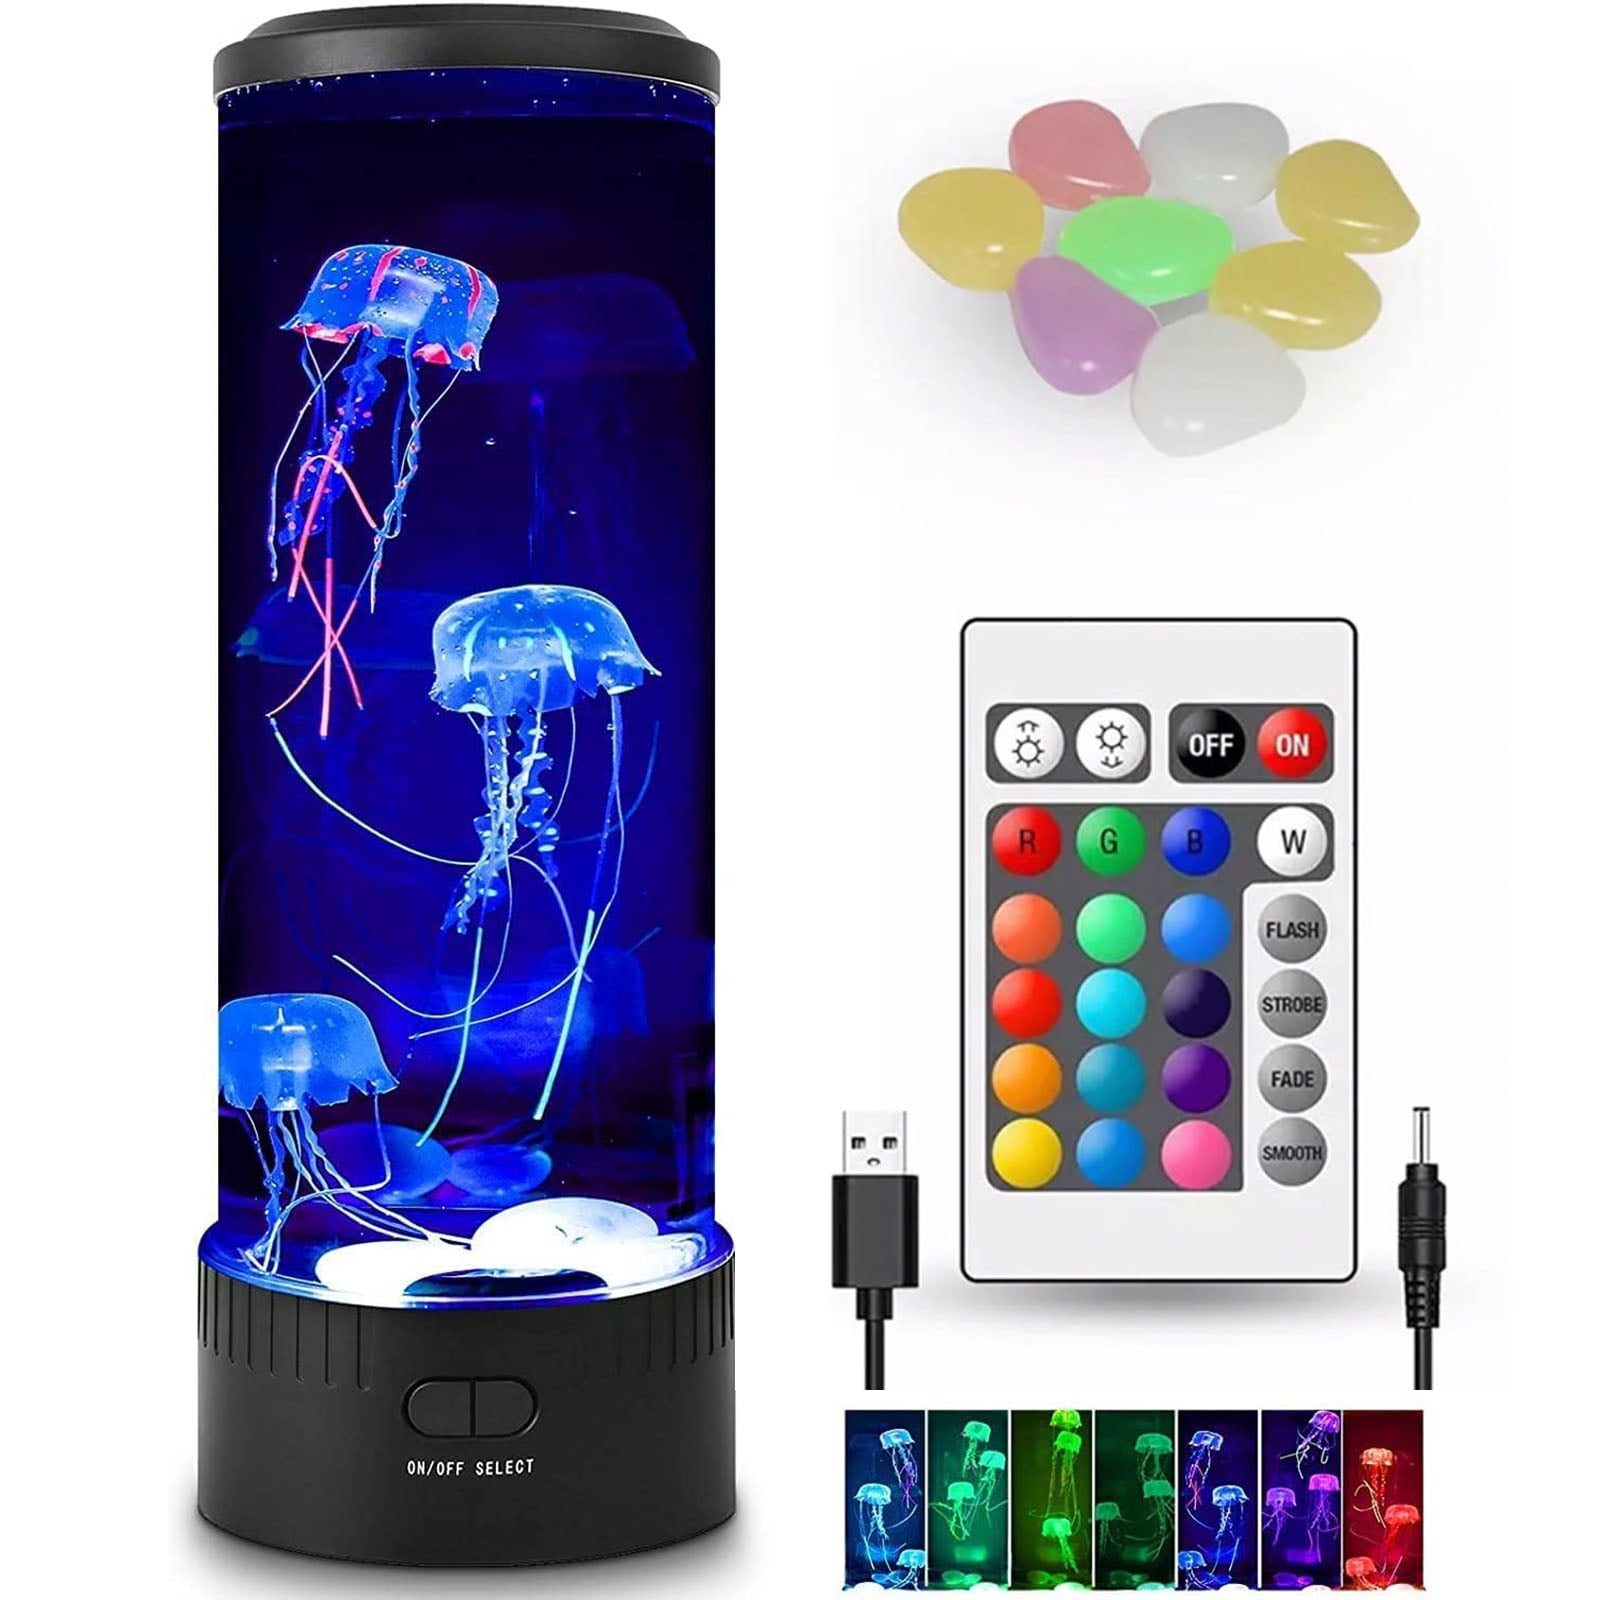 Jellyfish Lava Lamp LED with 7 Color Changing Mood Light -Round ...